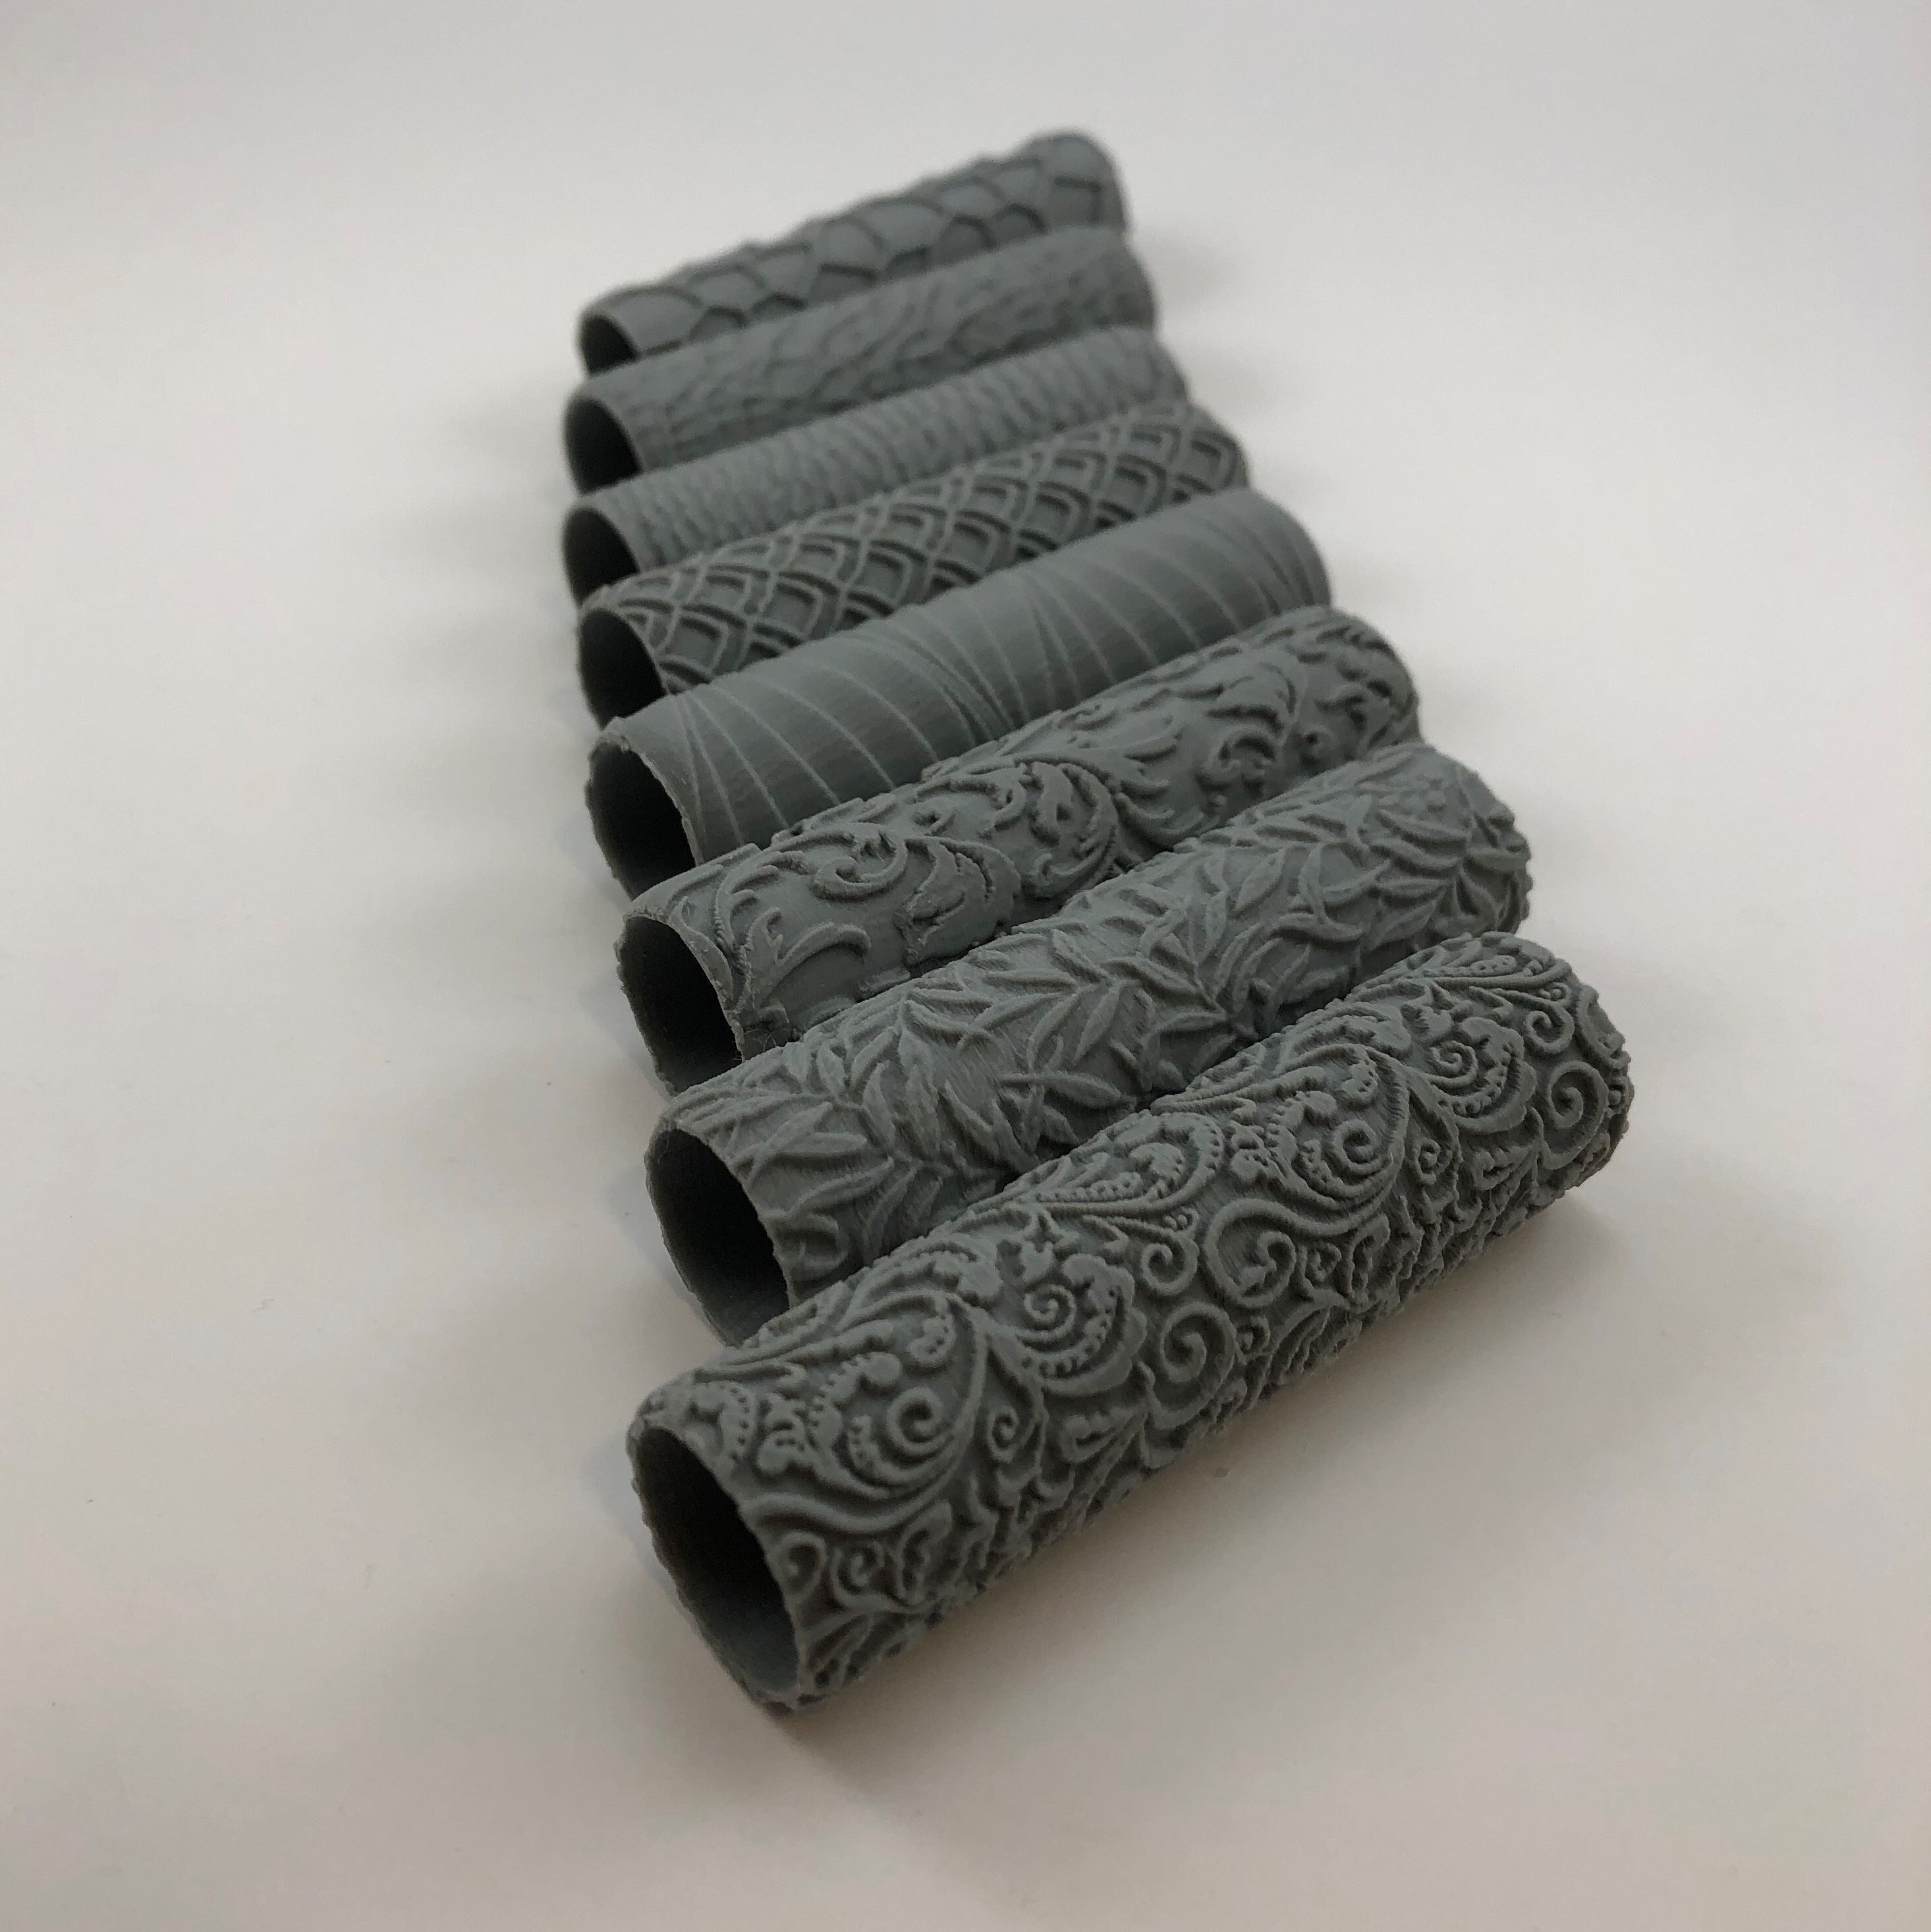 Texture Roller, Cobblestone Texture, High Quality Texture, Clay Stamp,  Polymer Clay Stamp, Metal Clay Stamp -  Norway